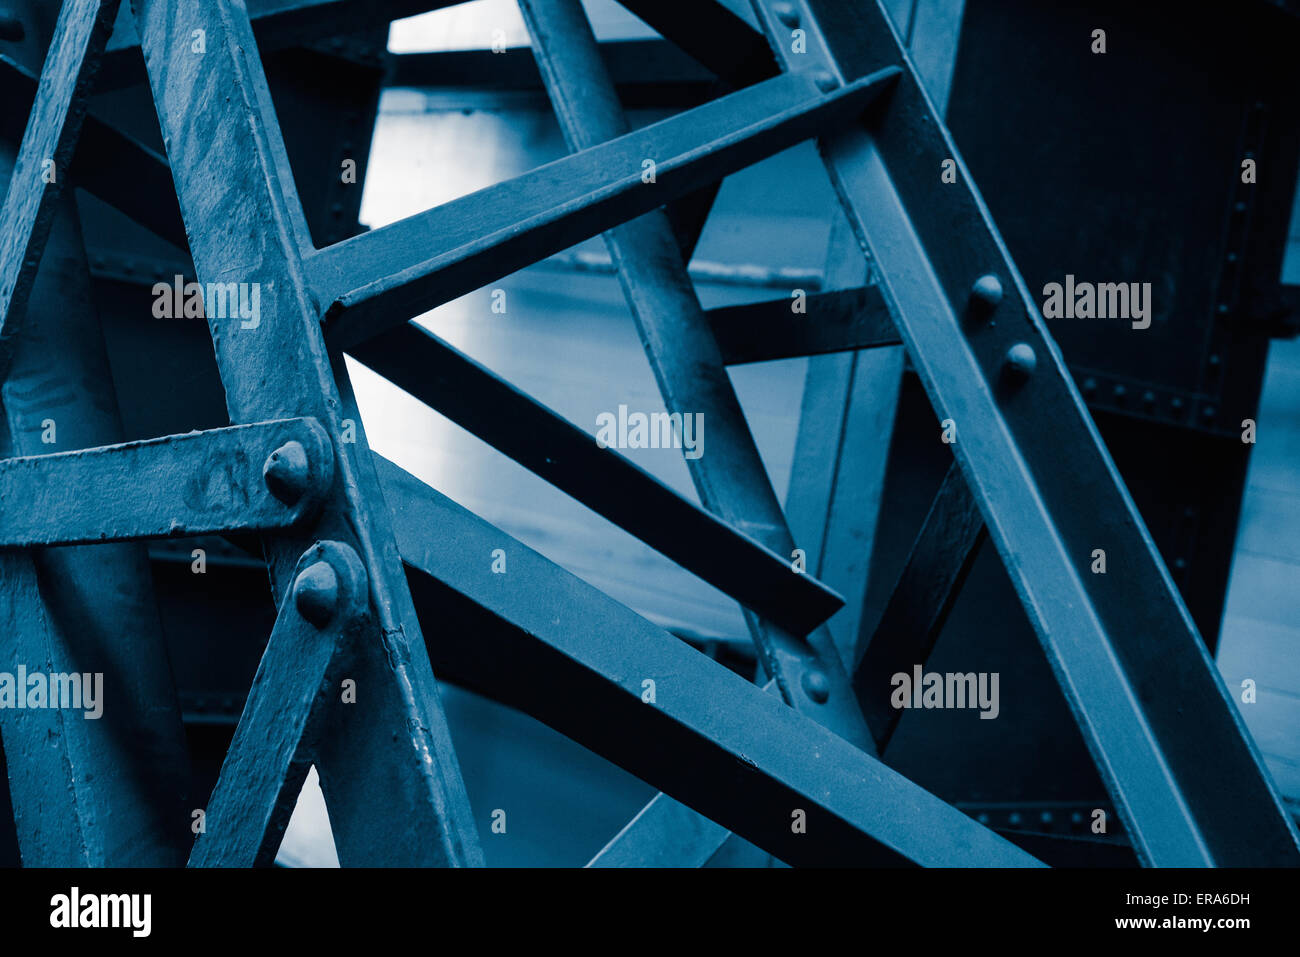 Blue and black abstract steel construction Stock Photo